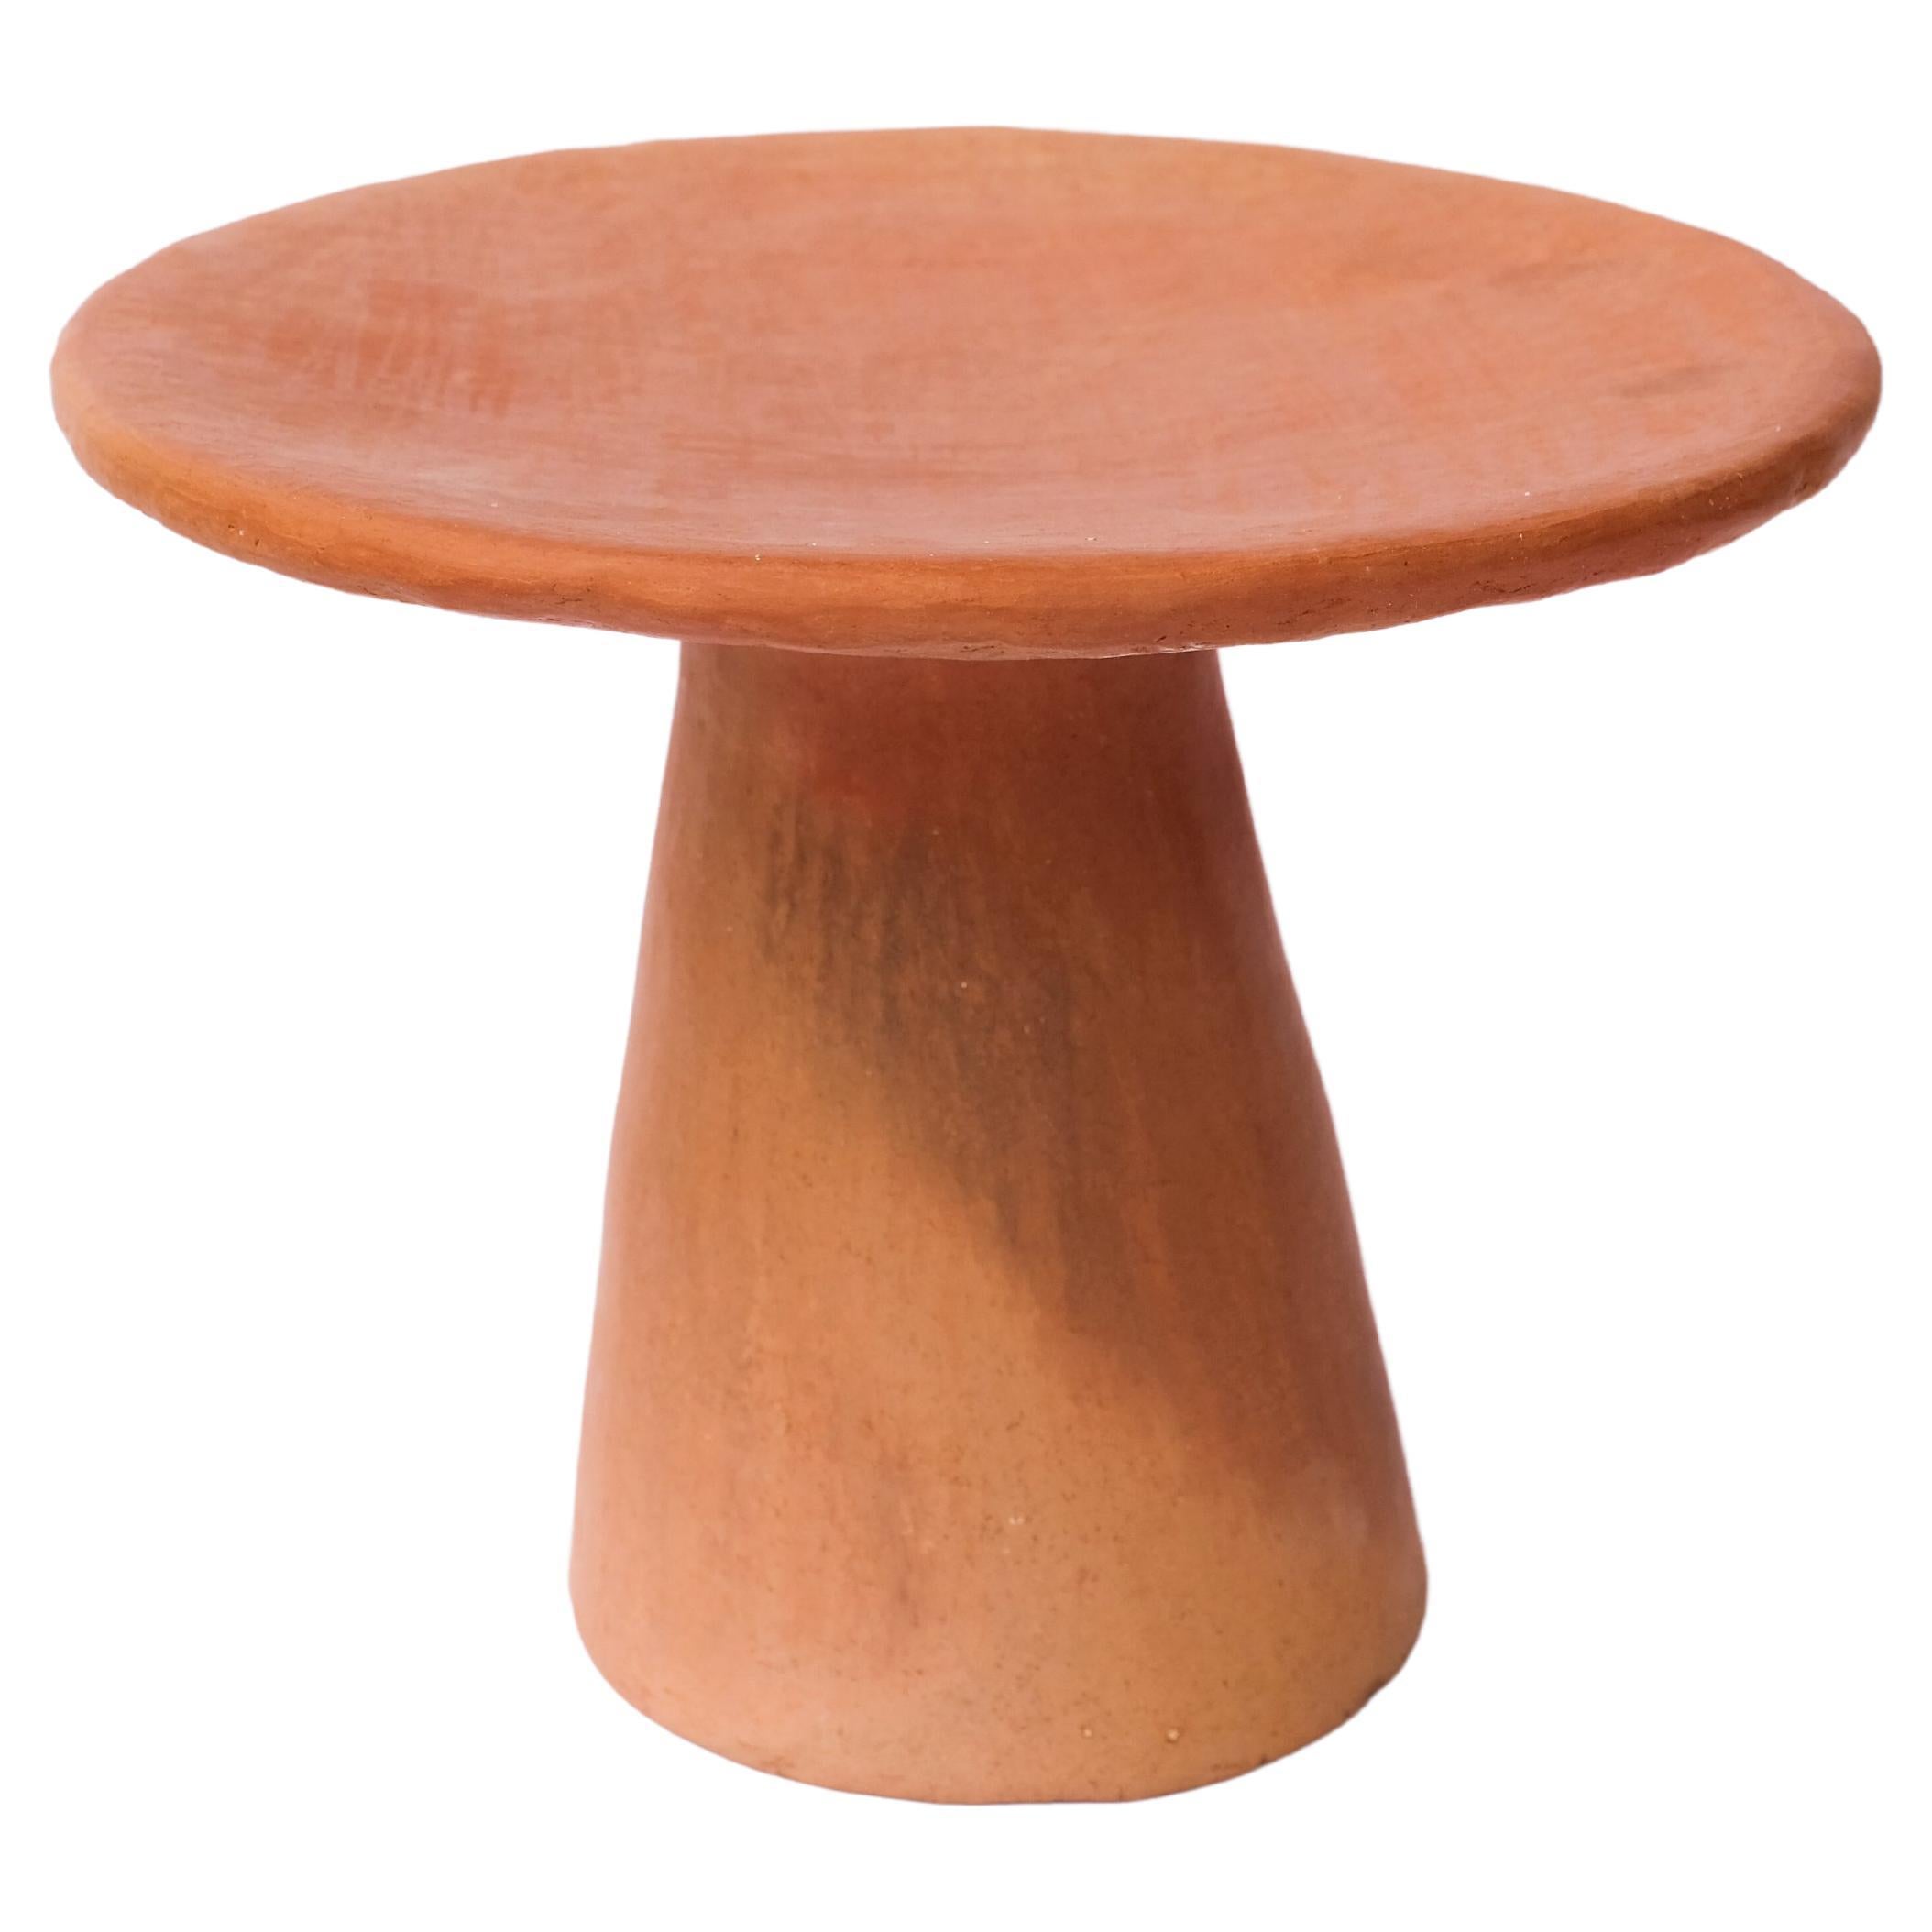 Terracotta contemporary Side Table Made of Clay, Handcrafted by the Potter Houda For Sale